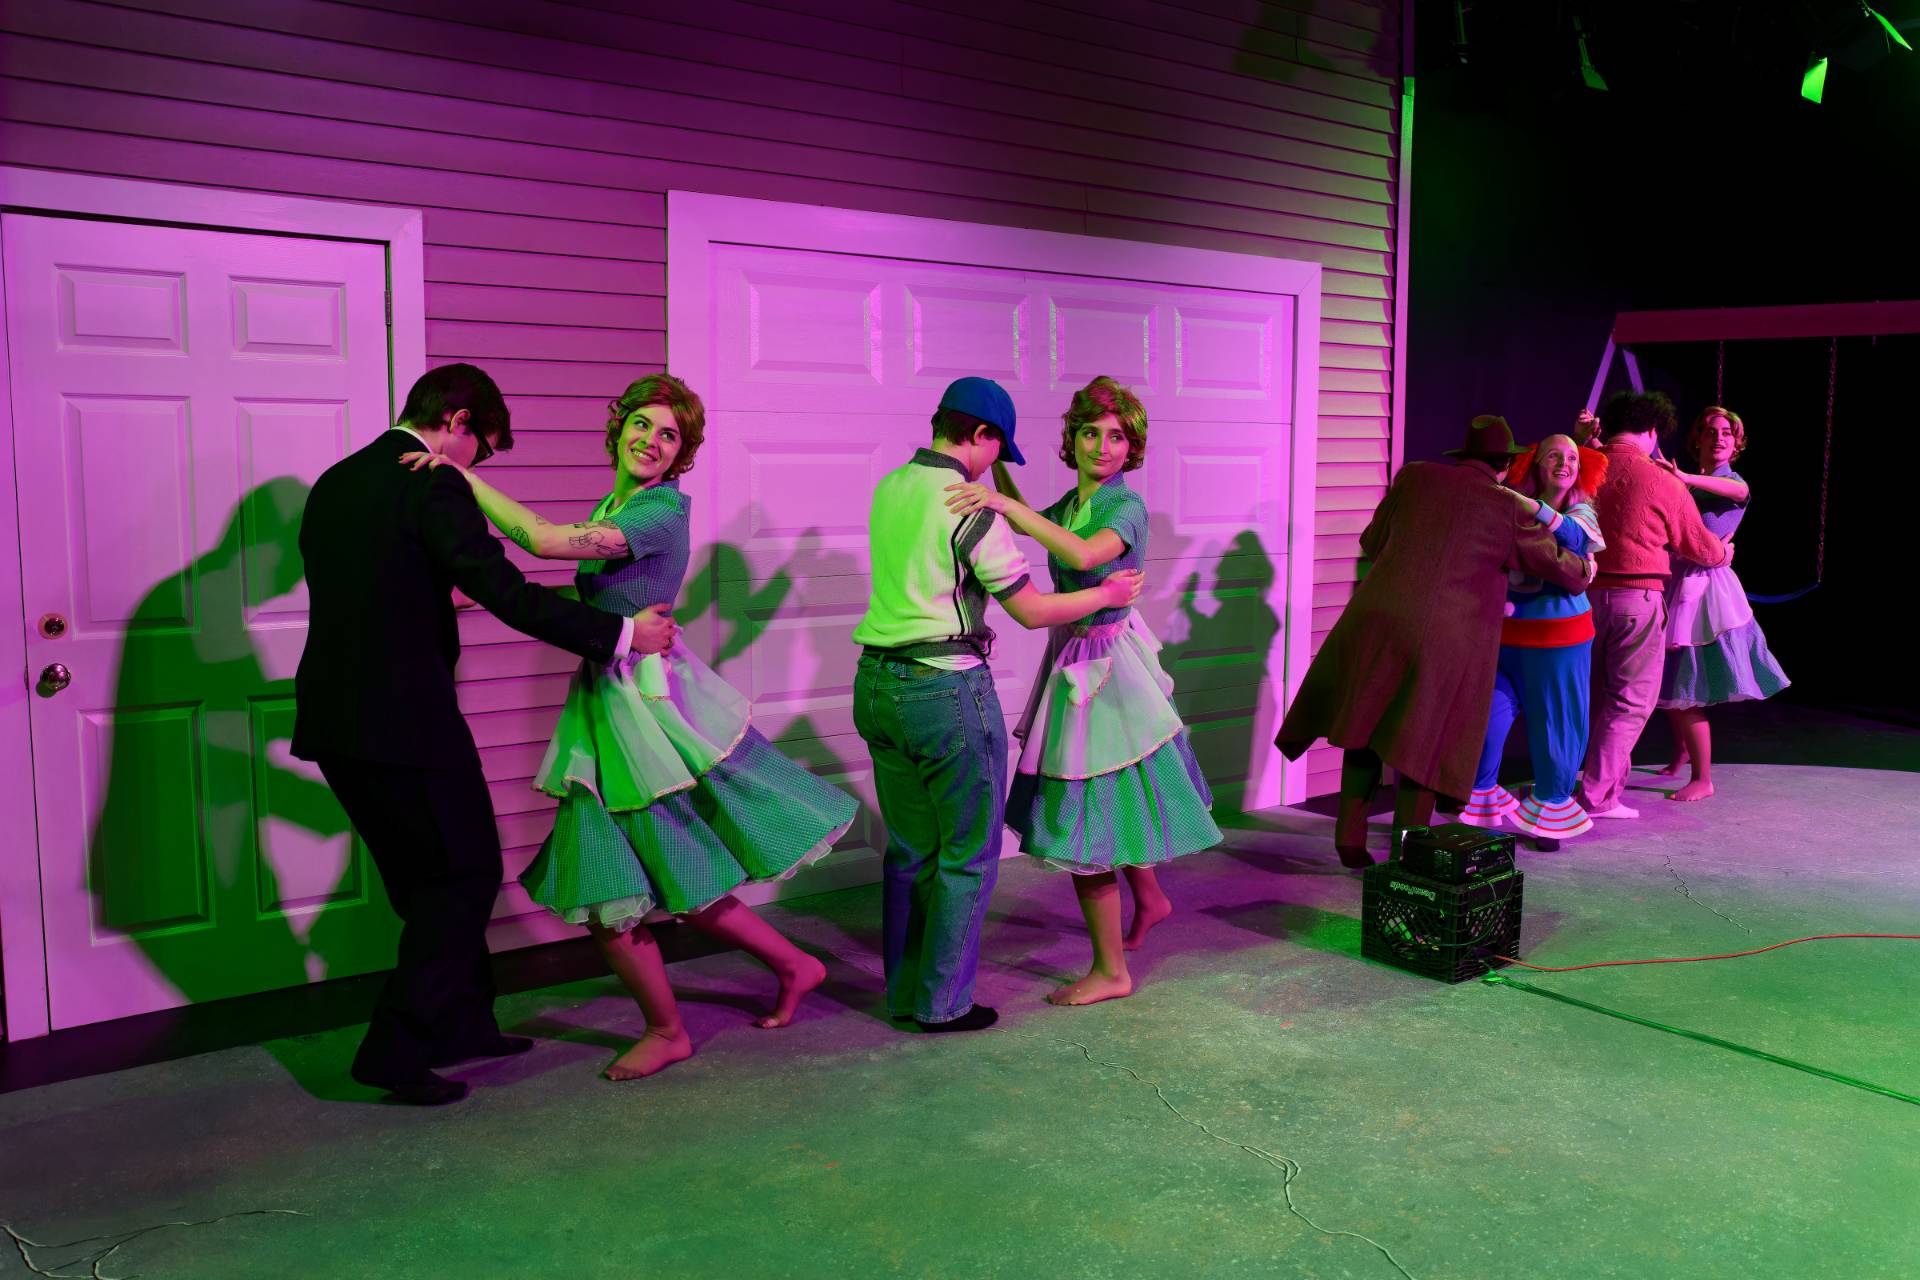 A group of people dance in pairs under purple and green background